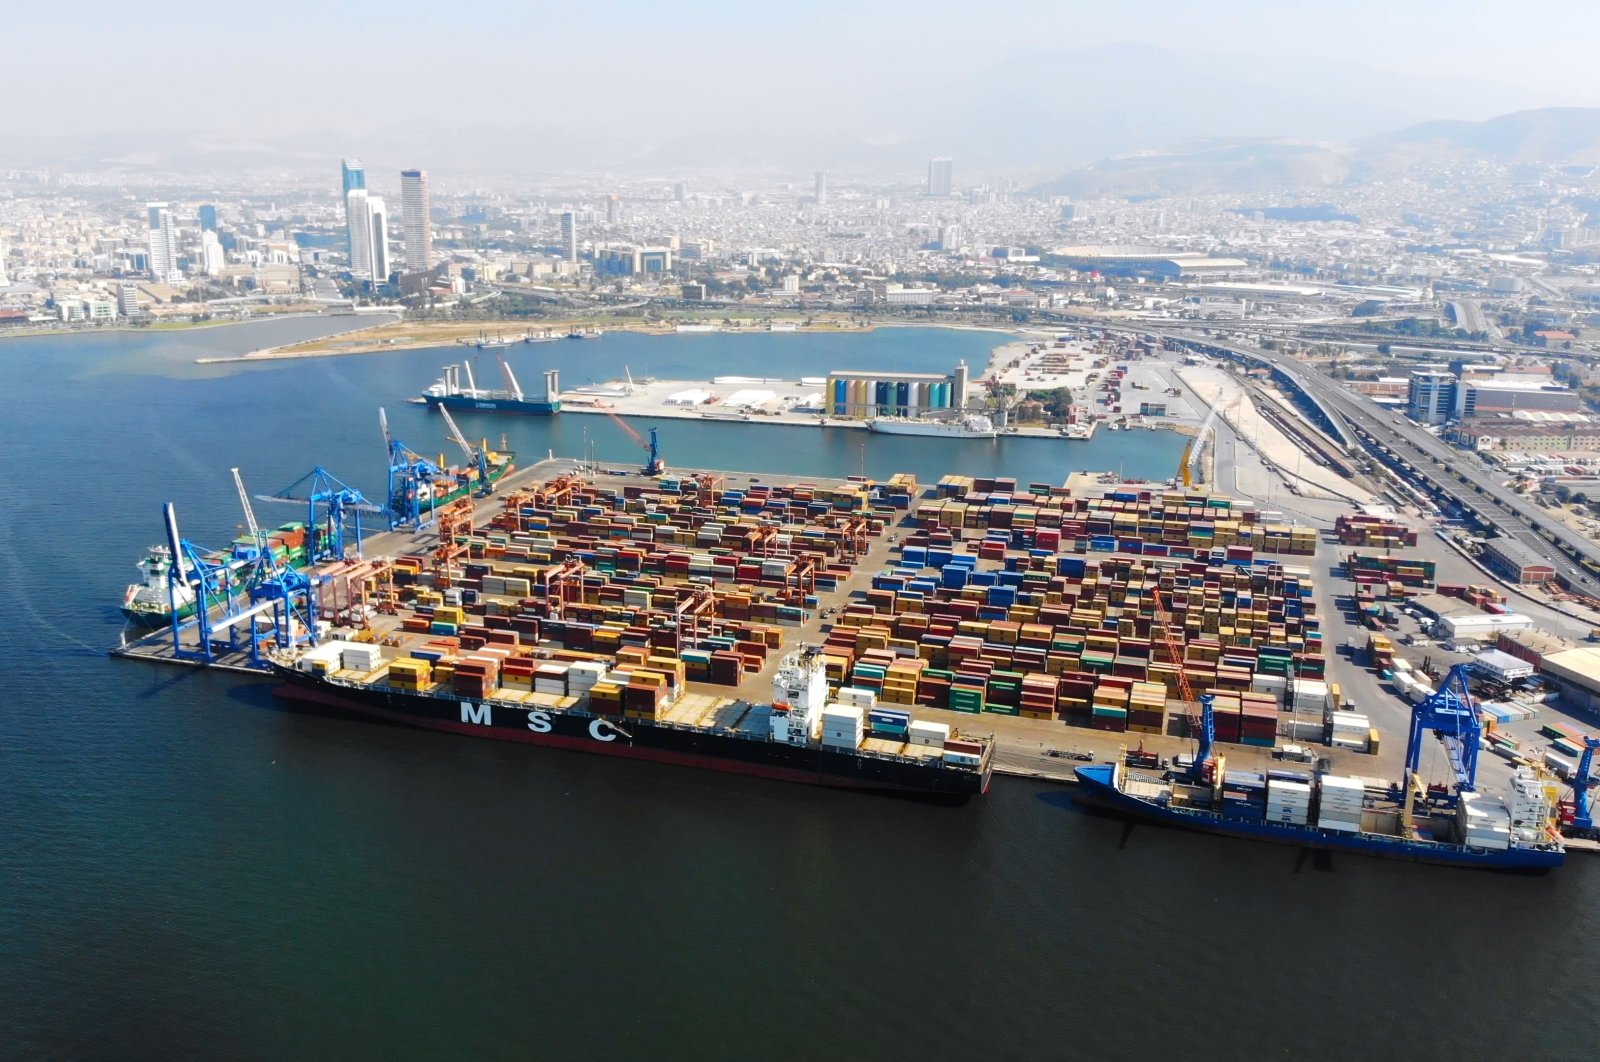 An aerial view of the Port of Izmir in western Turkey, July 10, 2018. (Shutterstock Photo)